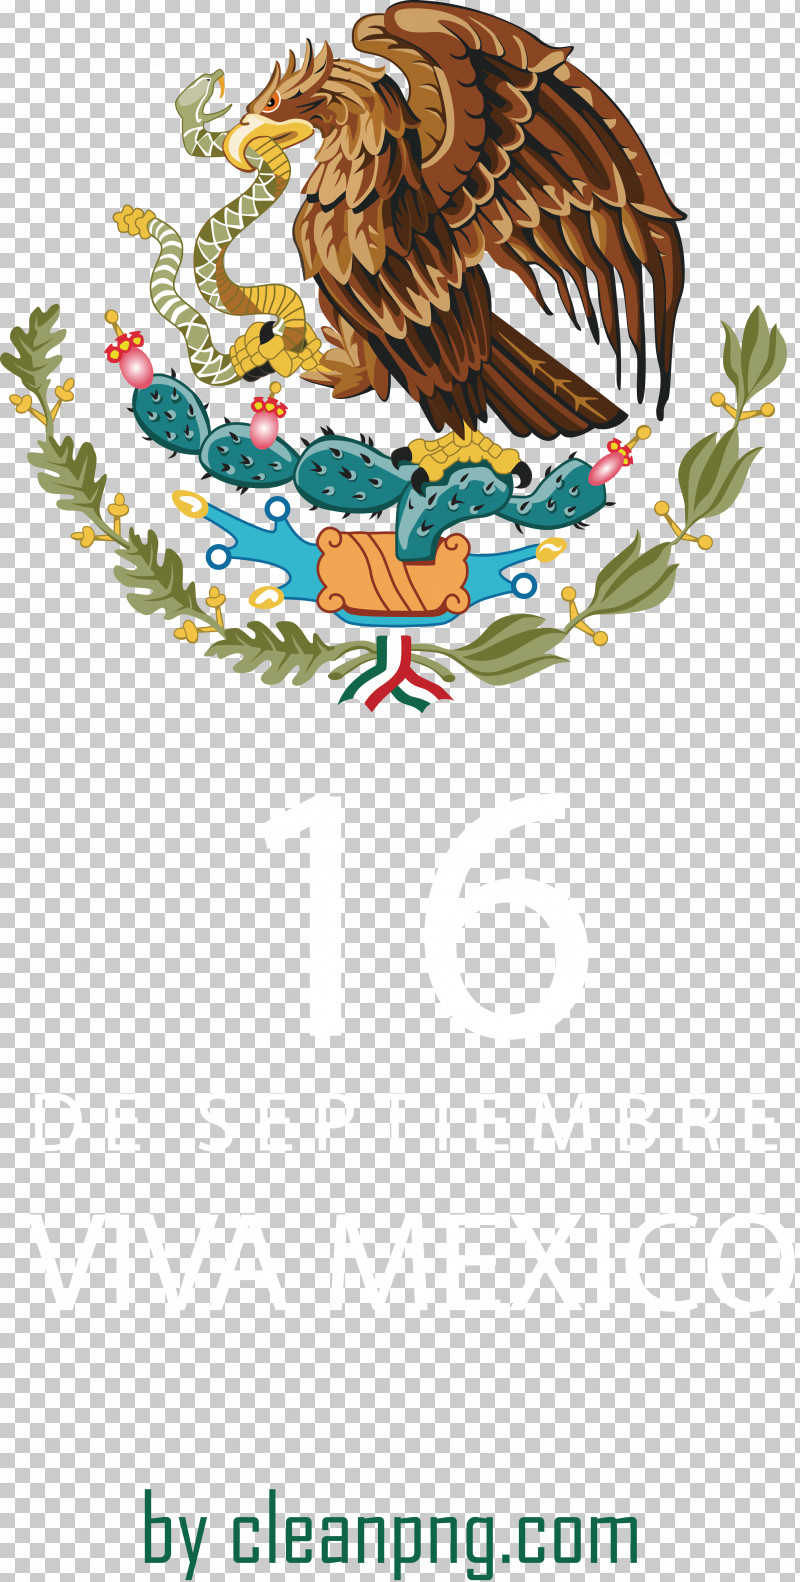 Mexico Flag Of Mexico Coat Of Arms Of Mexico Flag PNG, Clipart, Coat Of Arms, Coat Of Arms Of Mexico, Eagle, Flag, Flag Of Guadalajara Free PNG Download